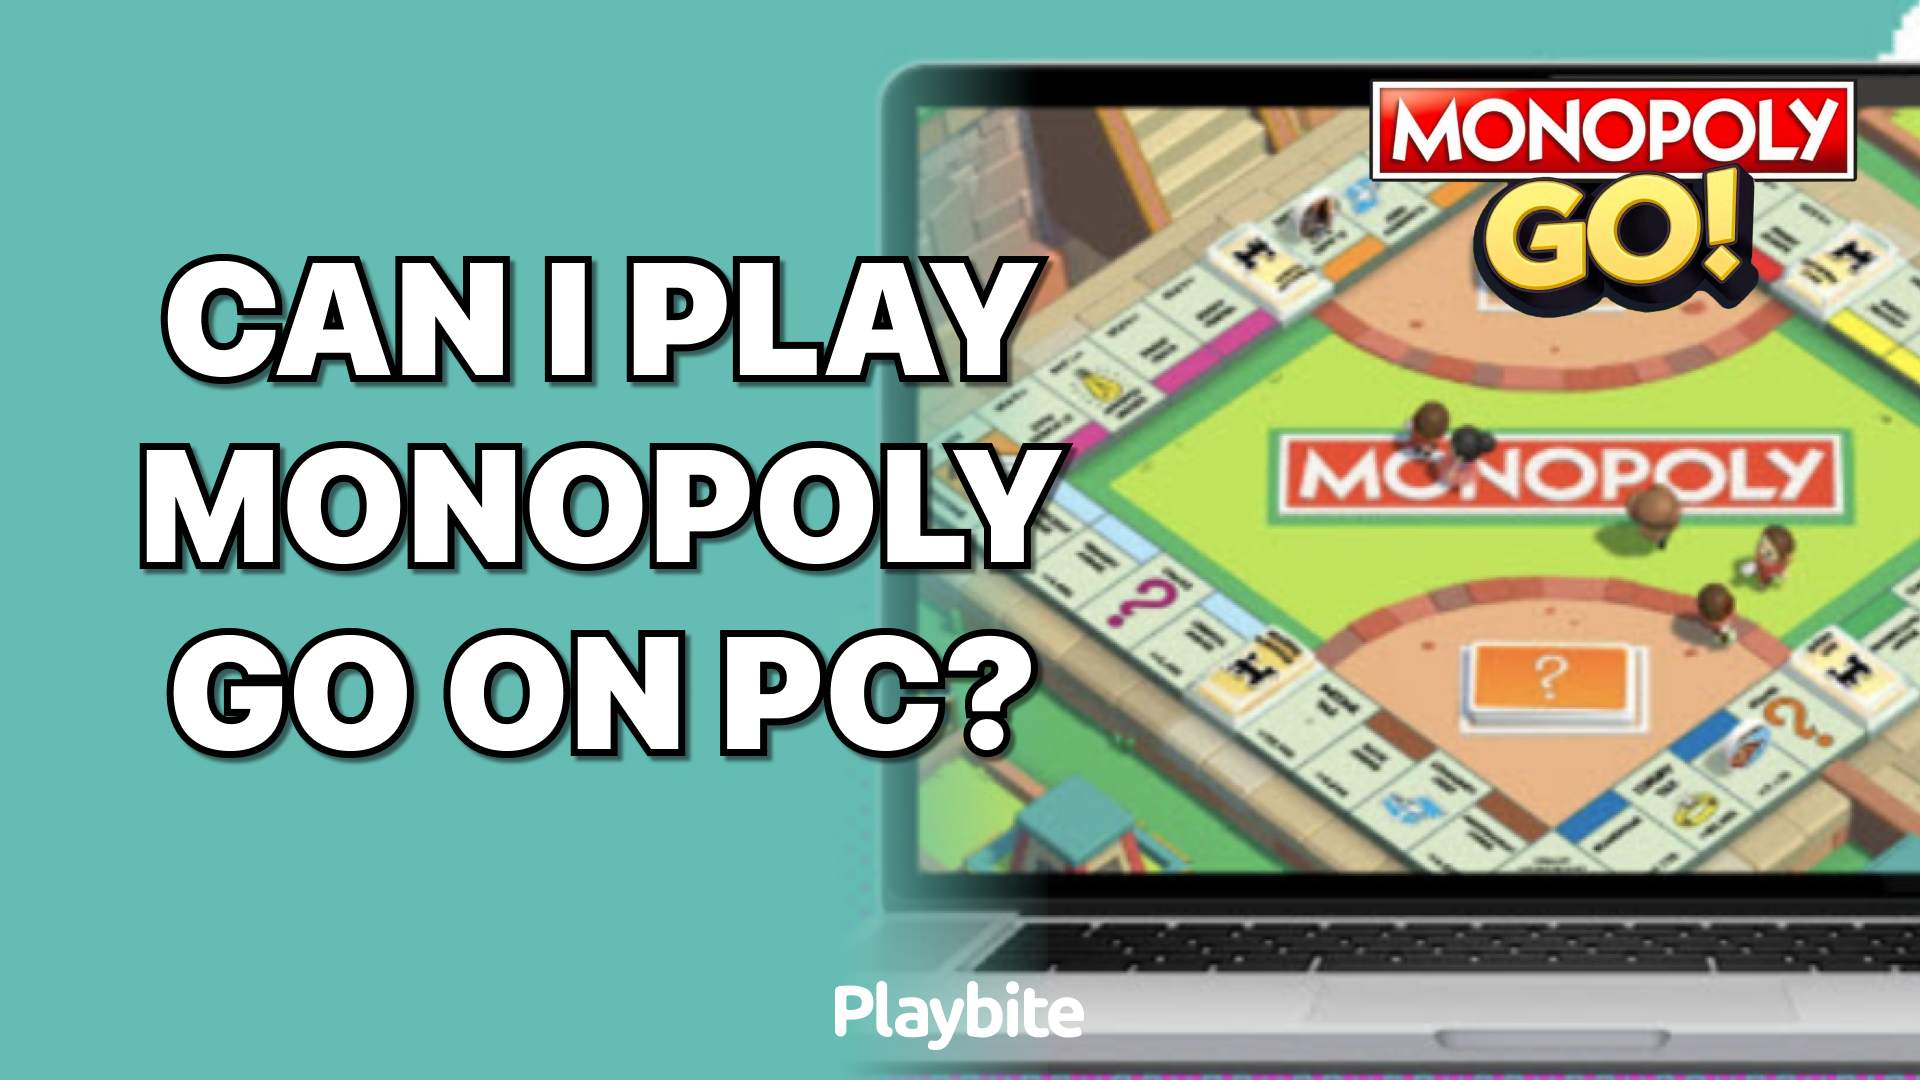 Can I Play Monopoly GO! On PC?